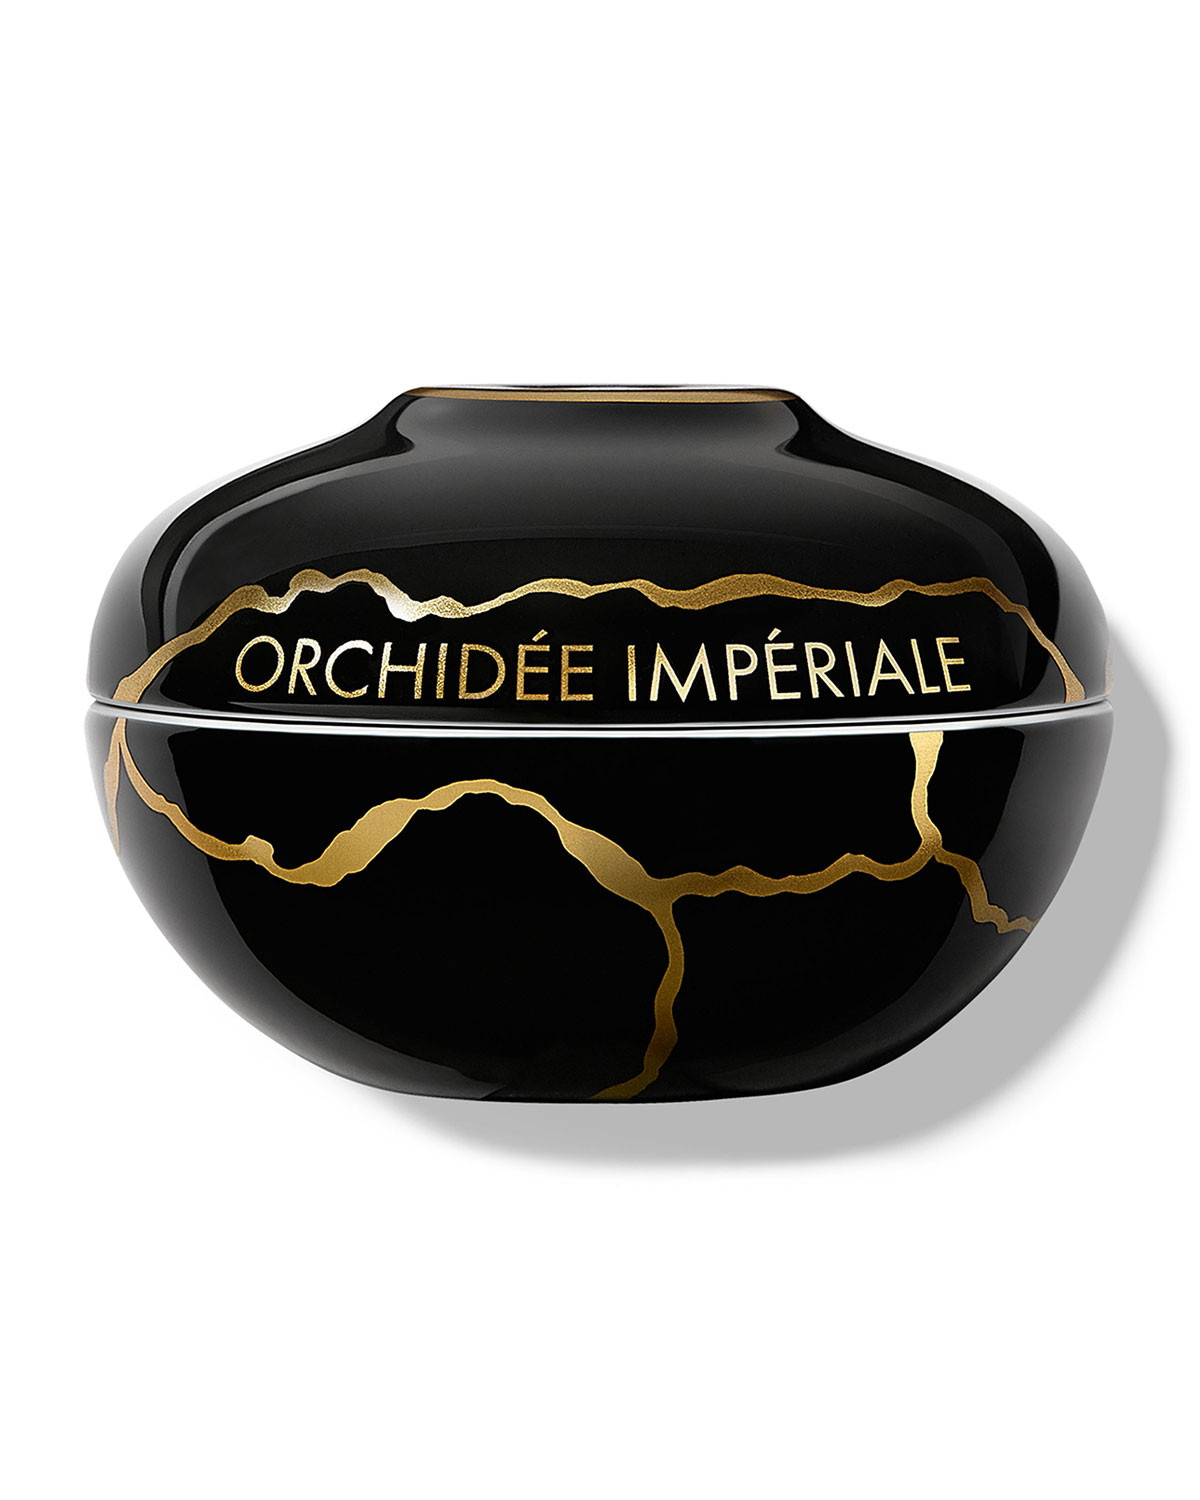 Guerlain 1.7 OZ. ORCHIDEE IMPERIALE BLACK CREAM 24K GOLD - LIMITED EDITION